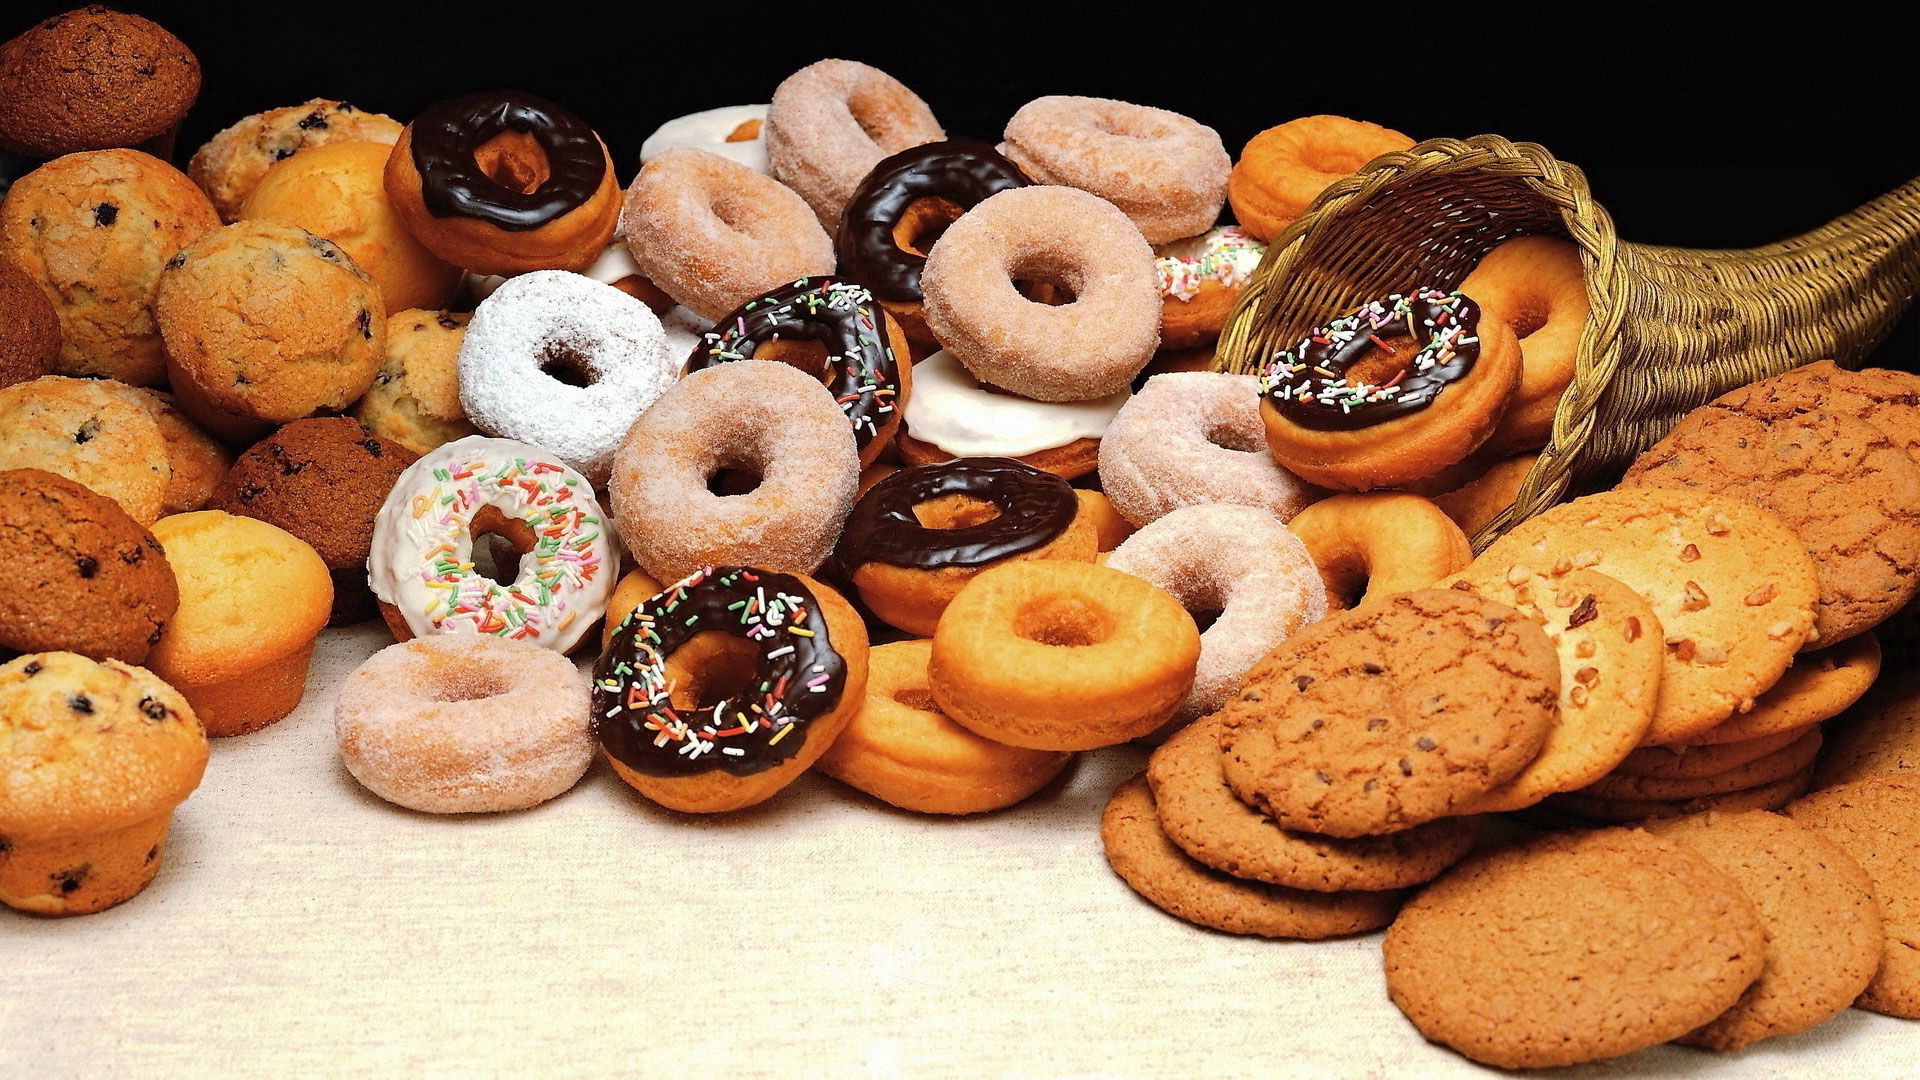 donuts, bakery products, food, cookies, assorted, baking, diversity, variety